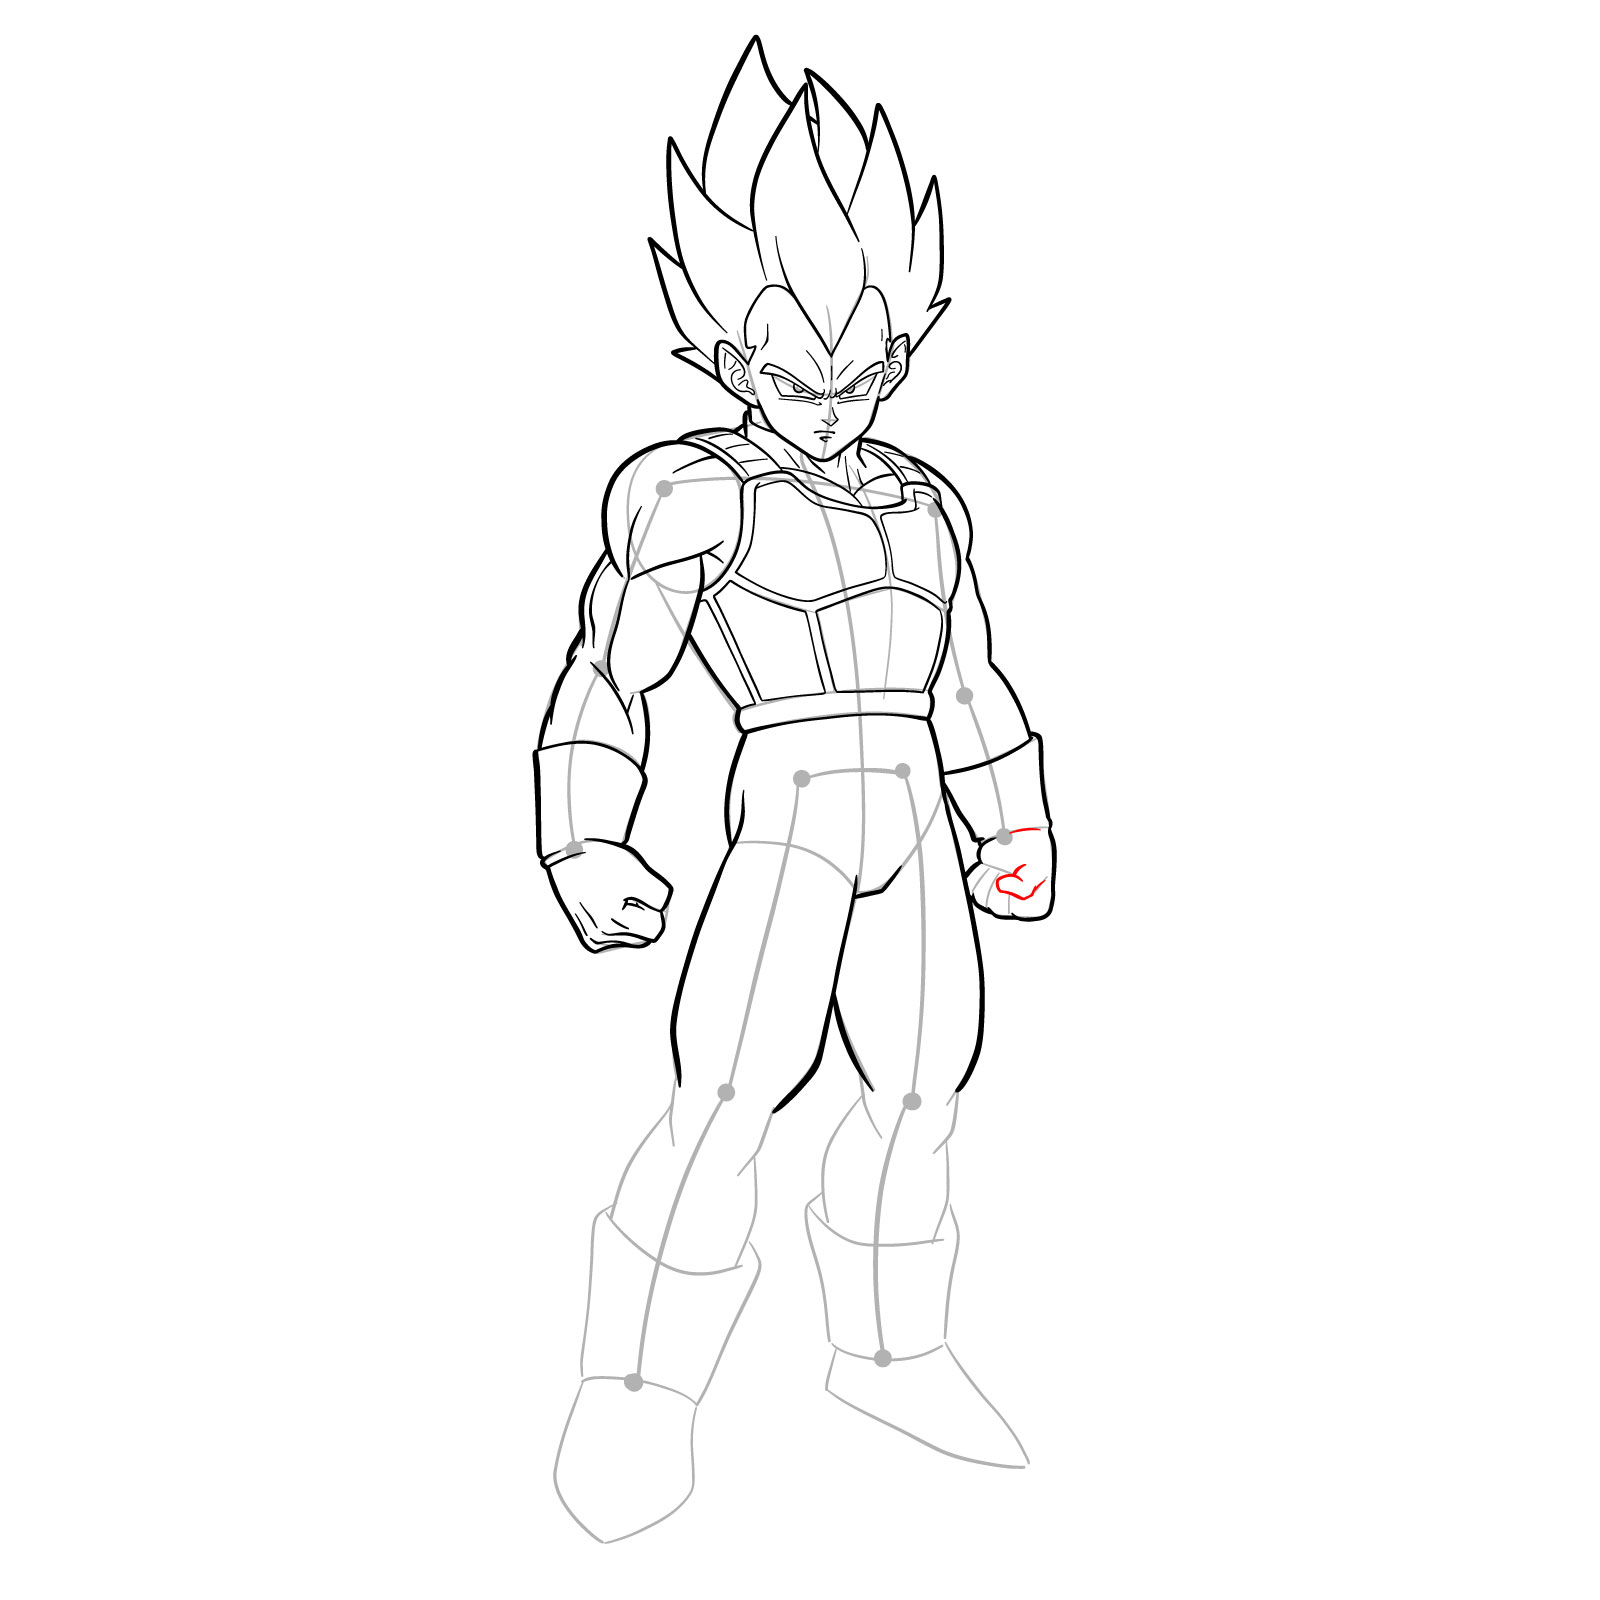 How to draw Vegeta in SSGSS - step 33